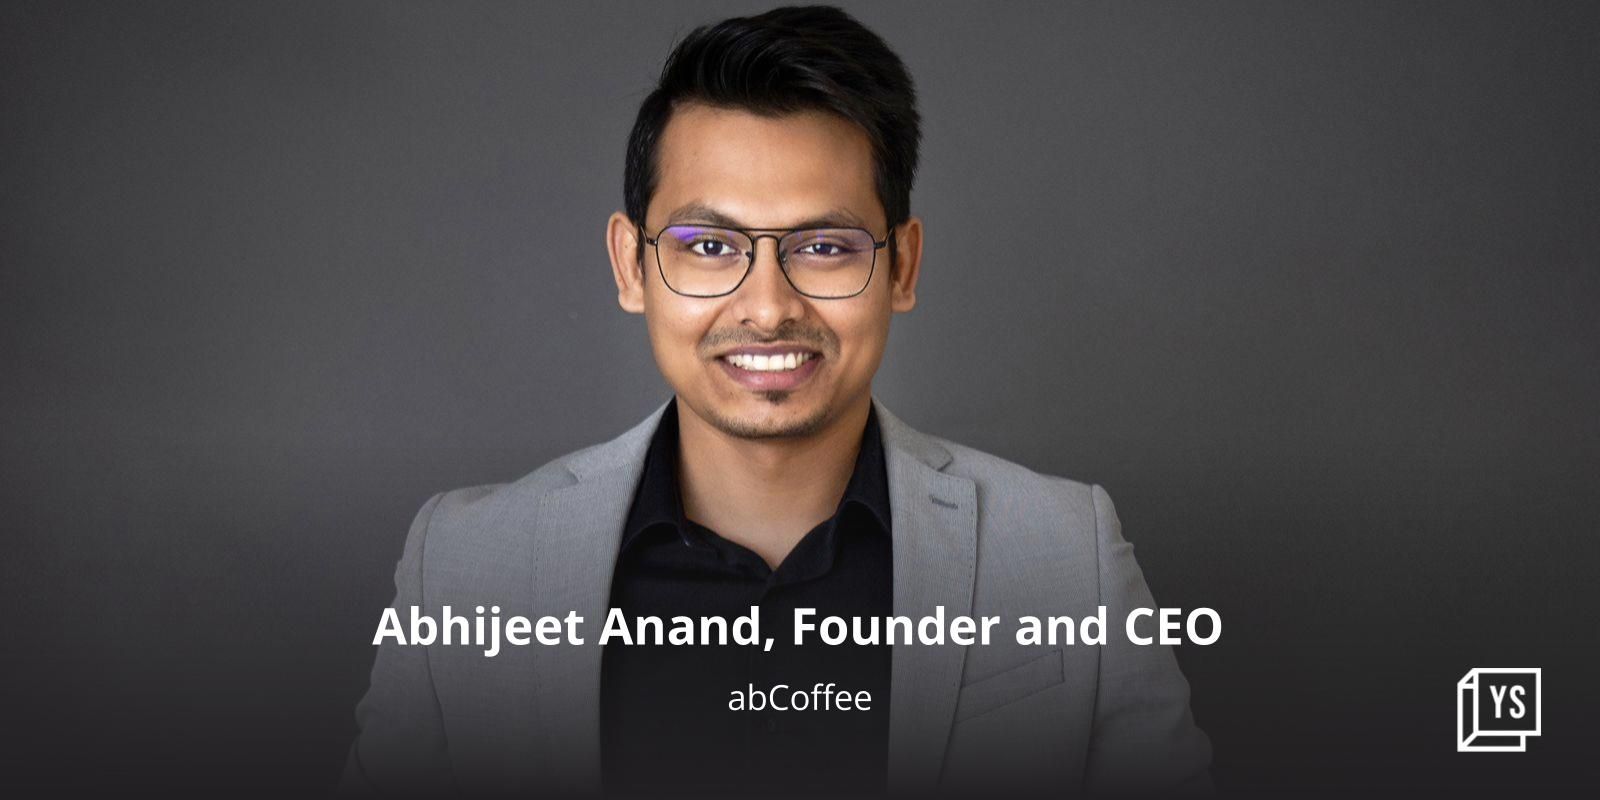 abCoffee promises to serve a quick cuppa at an 'affordable' price